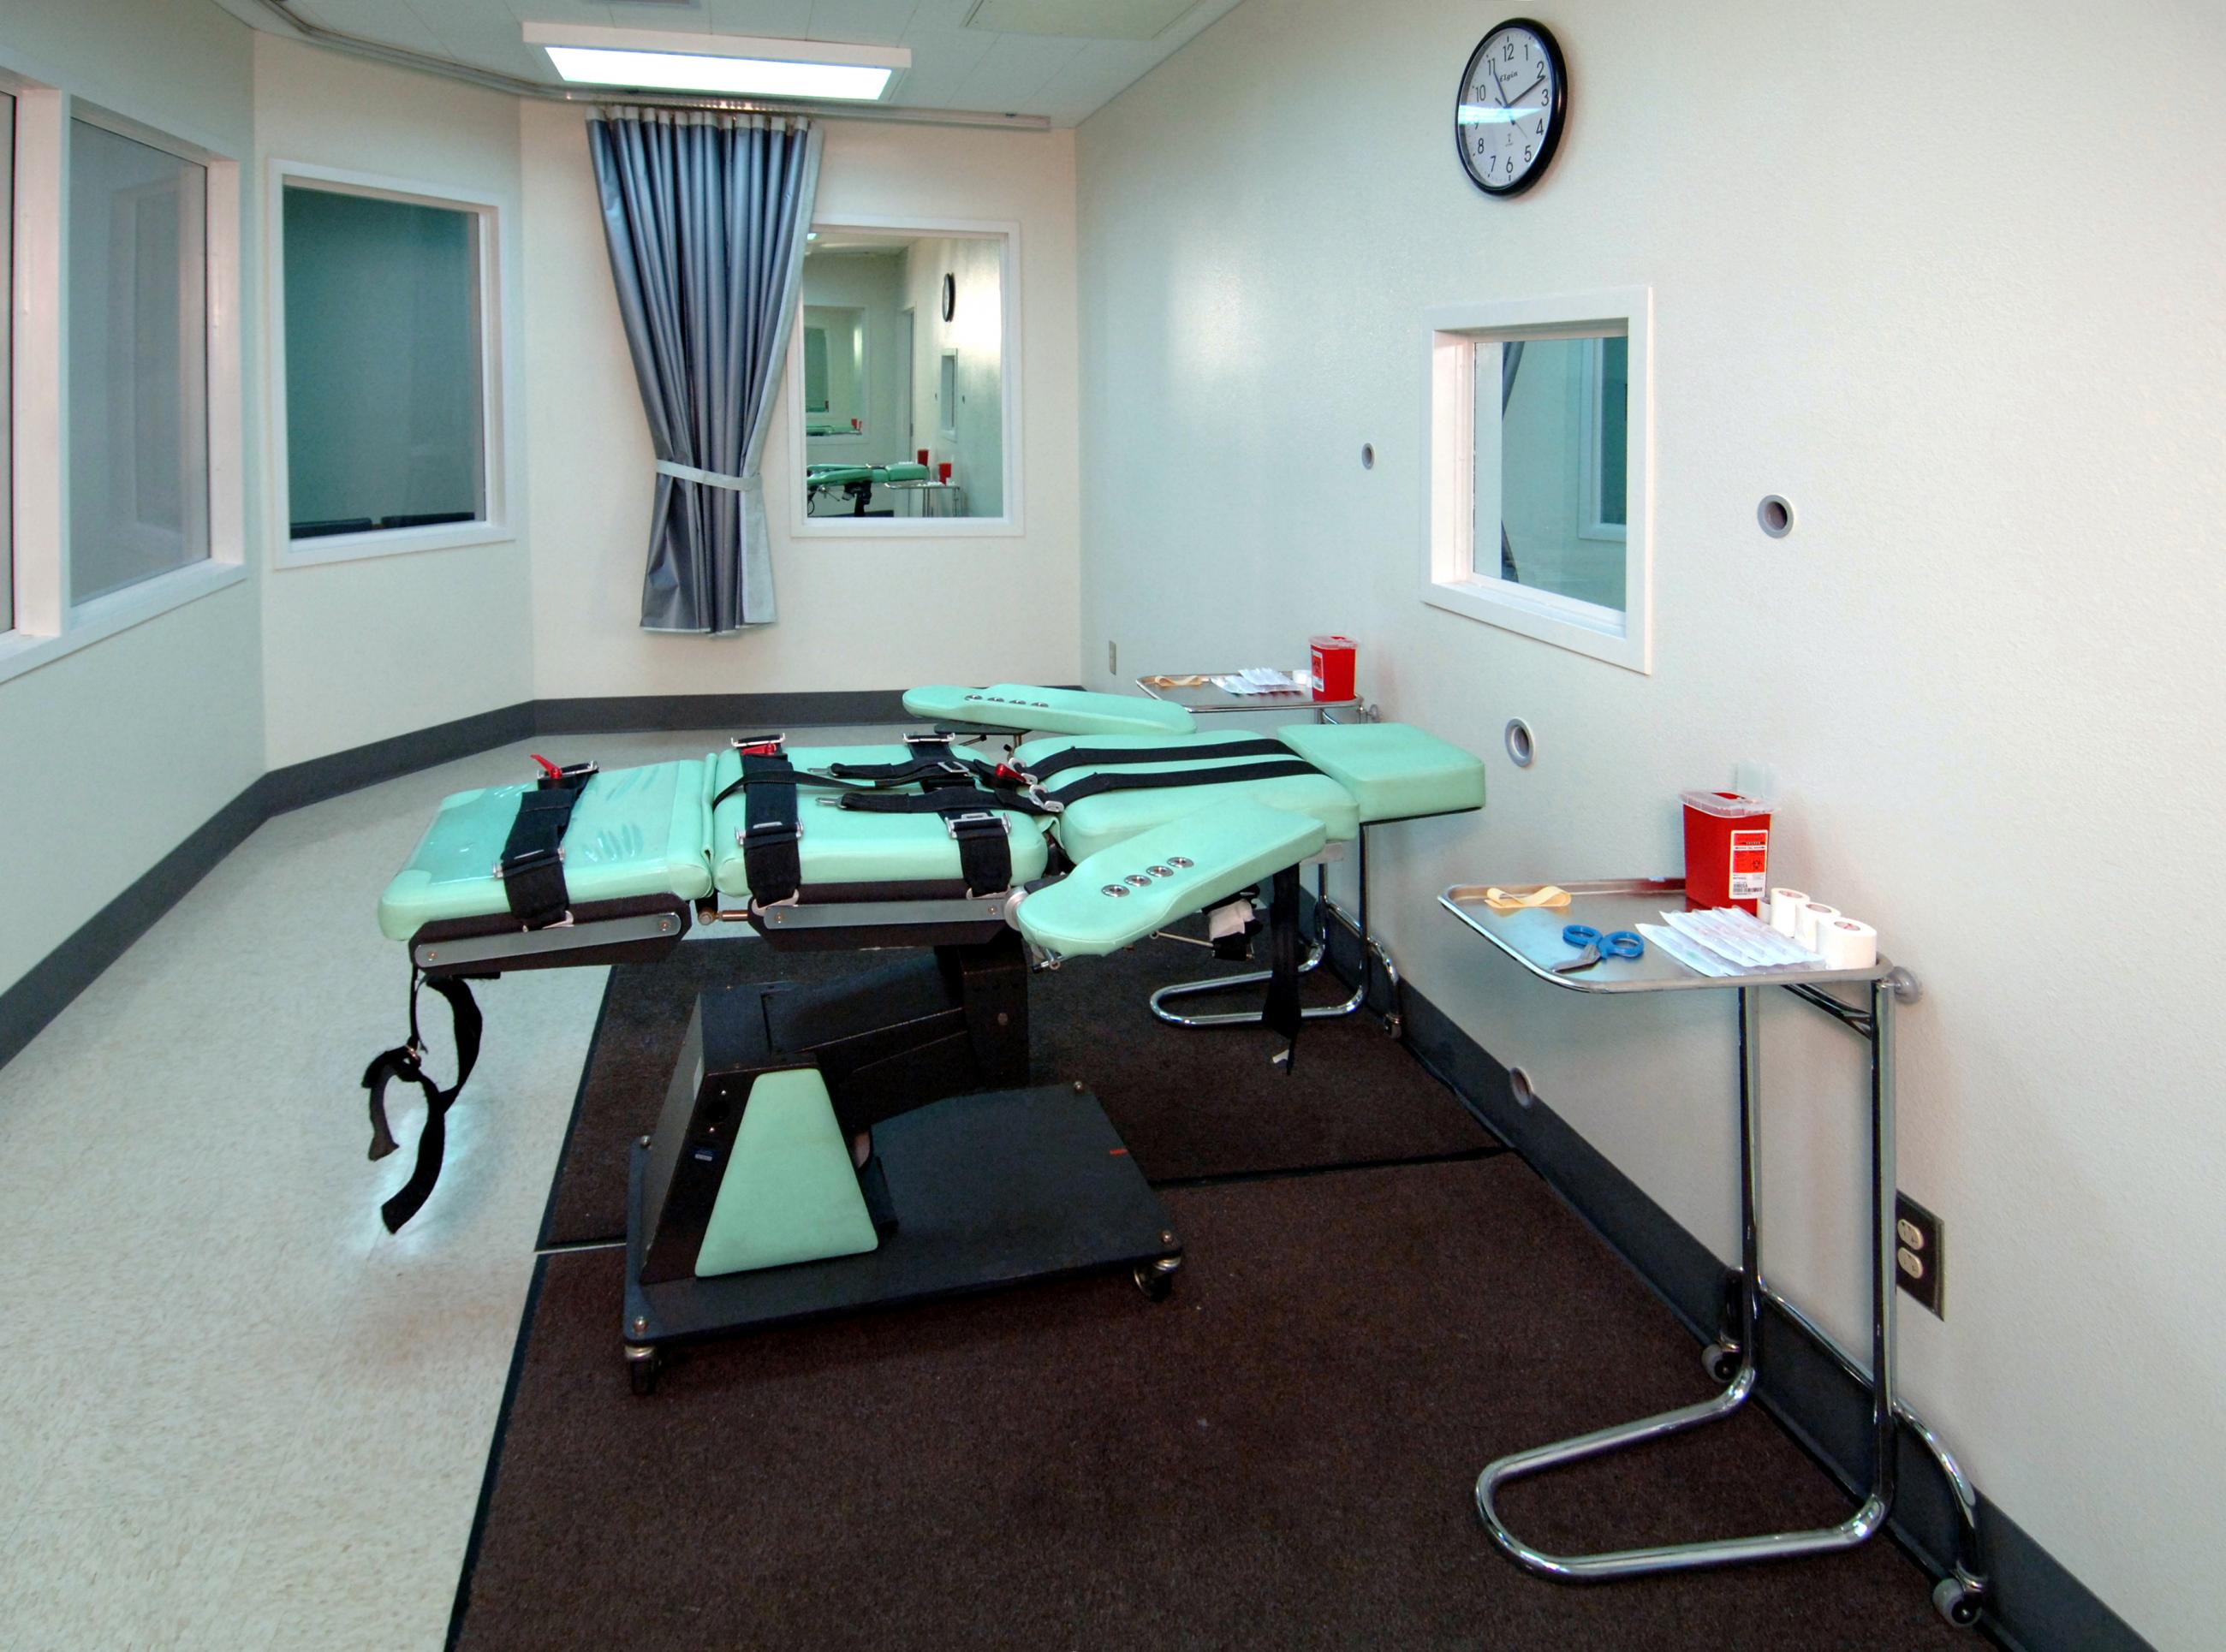 Lethal injection room for execution